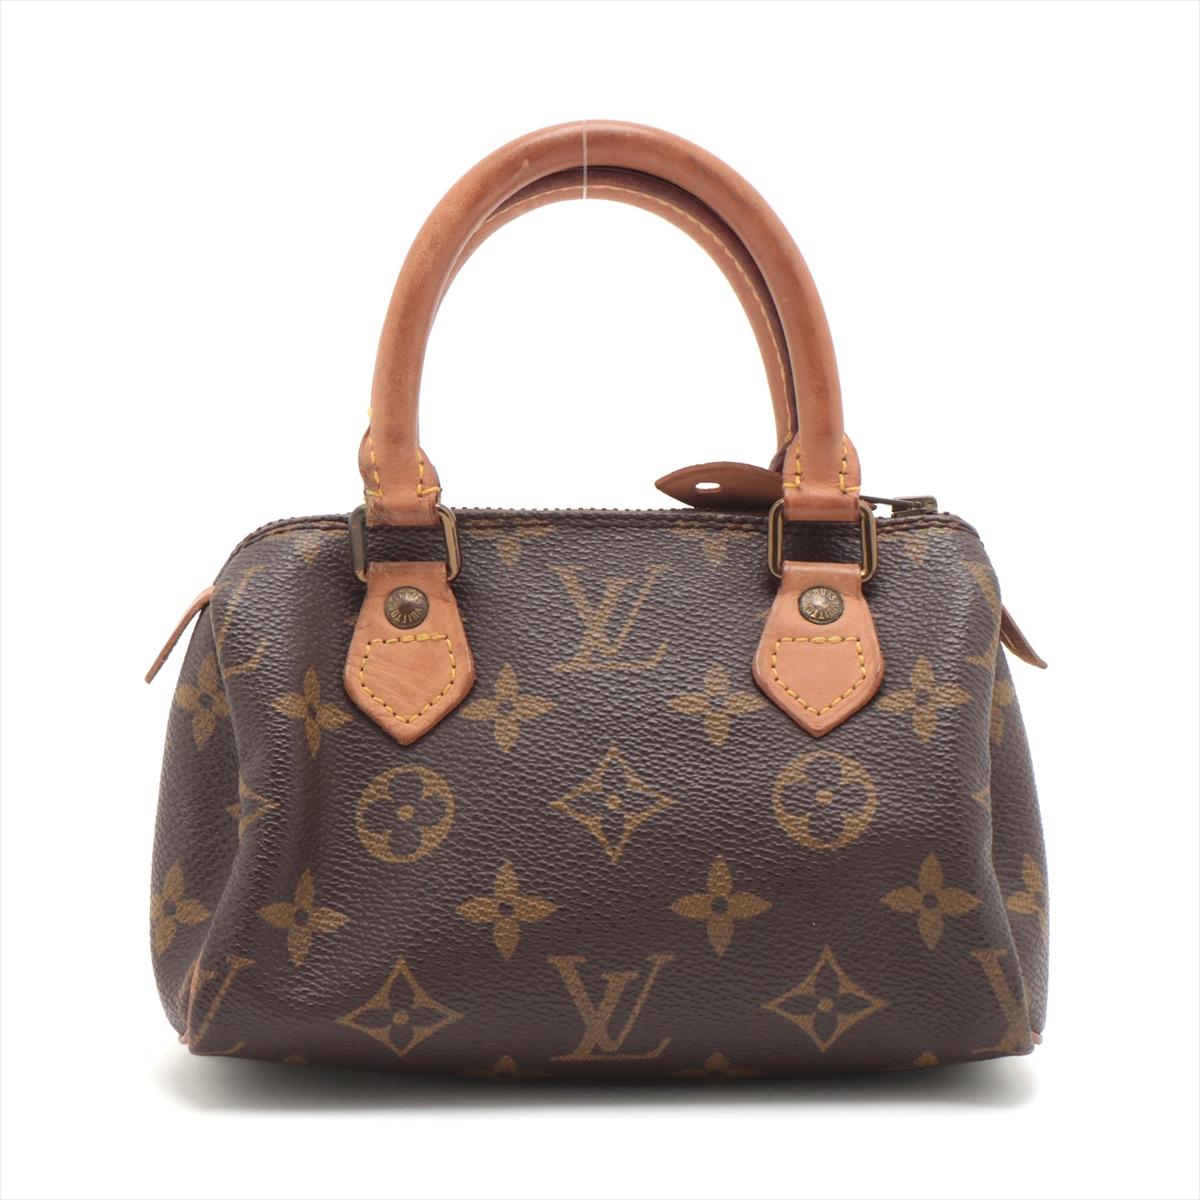 The Louis Vuitton Monogram Mini Speedy Bag is a charming and compact handbag that embodies timeless elegance and craftsmanship. Crafted from the iconic Monogram canvas, the bag features the renowned LV pattern, instantly recognizable as a symbol of